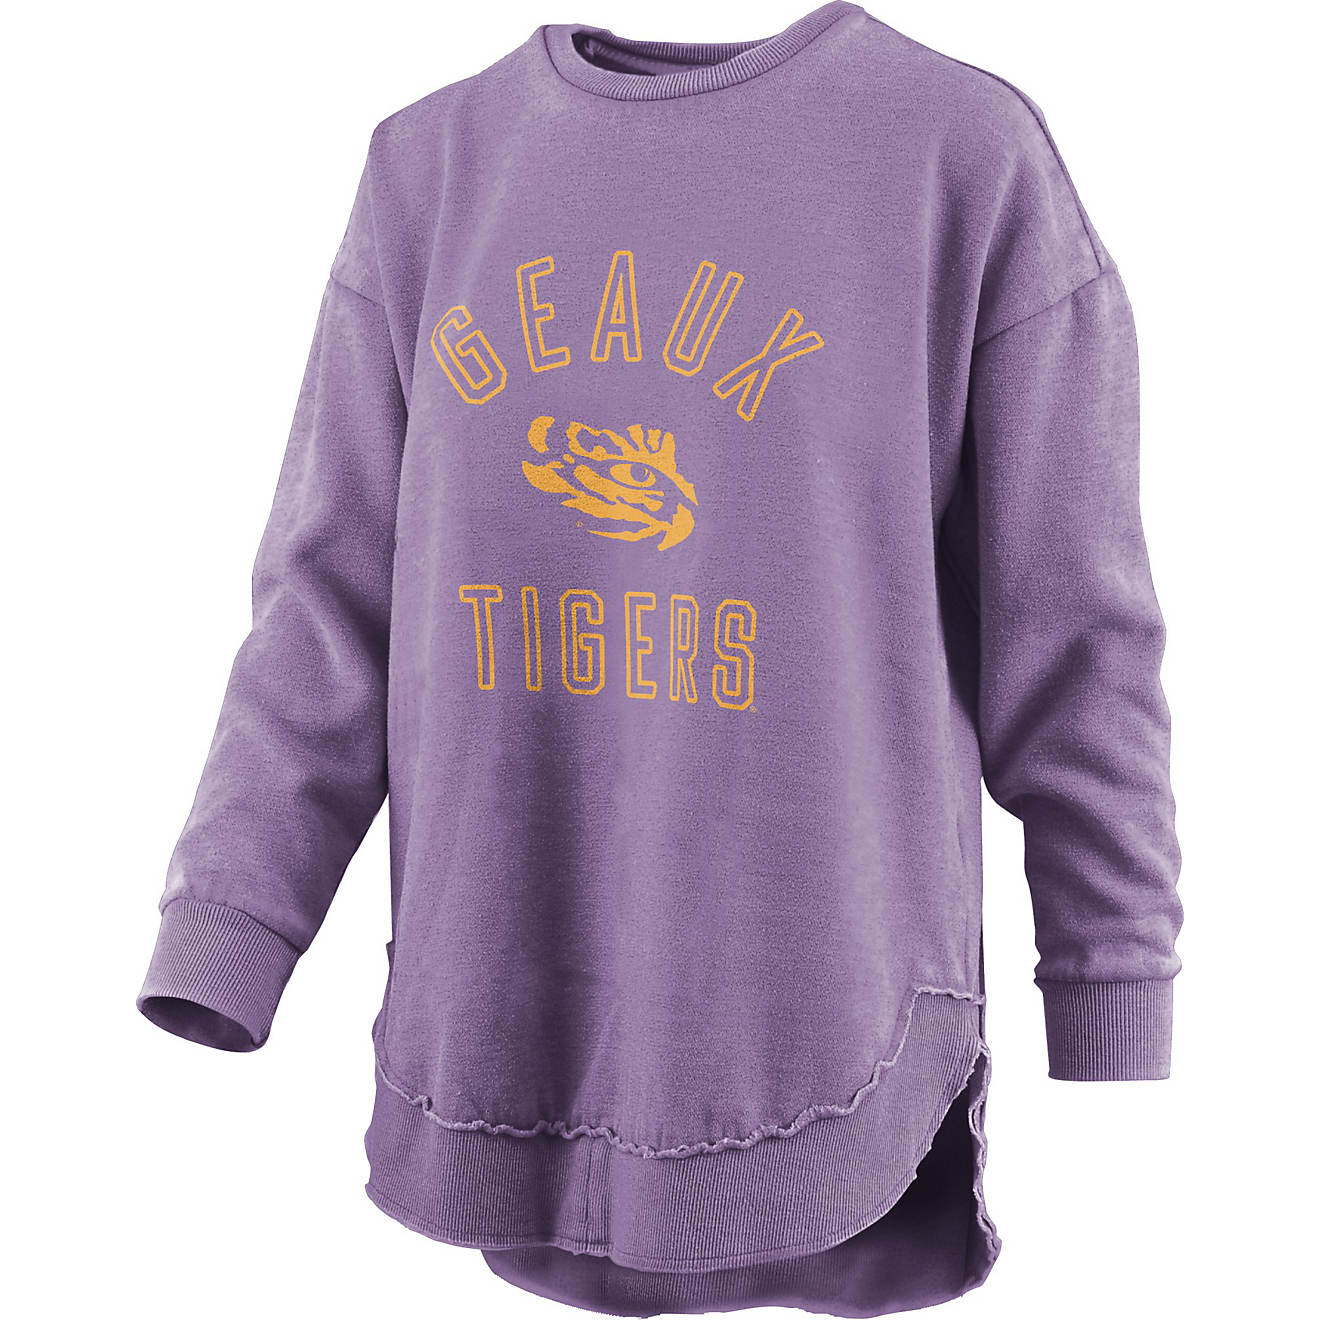 Three Square Women's Louisiana State University Rockford Vintage Wash Long Sleeve Top                                            - view number 1